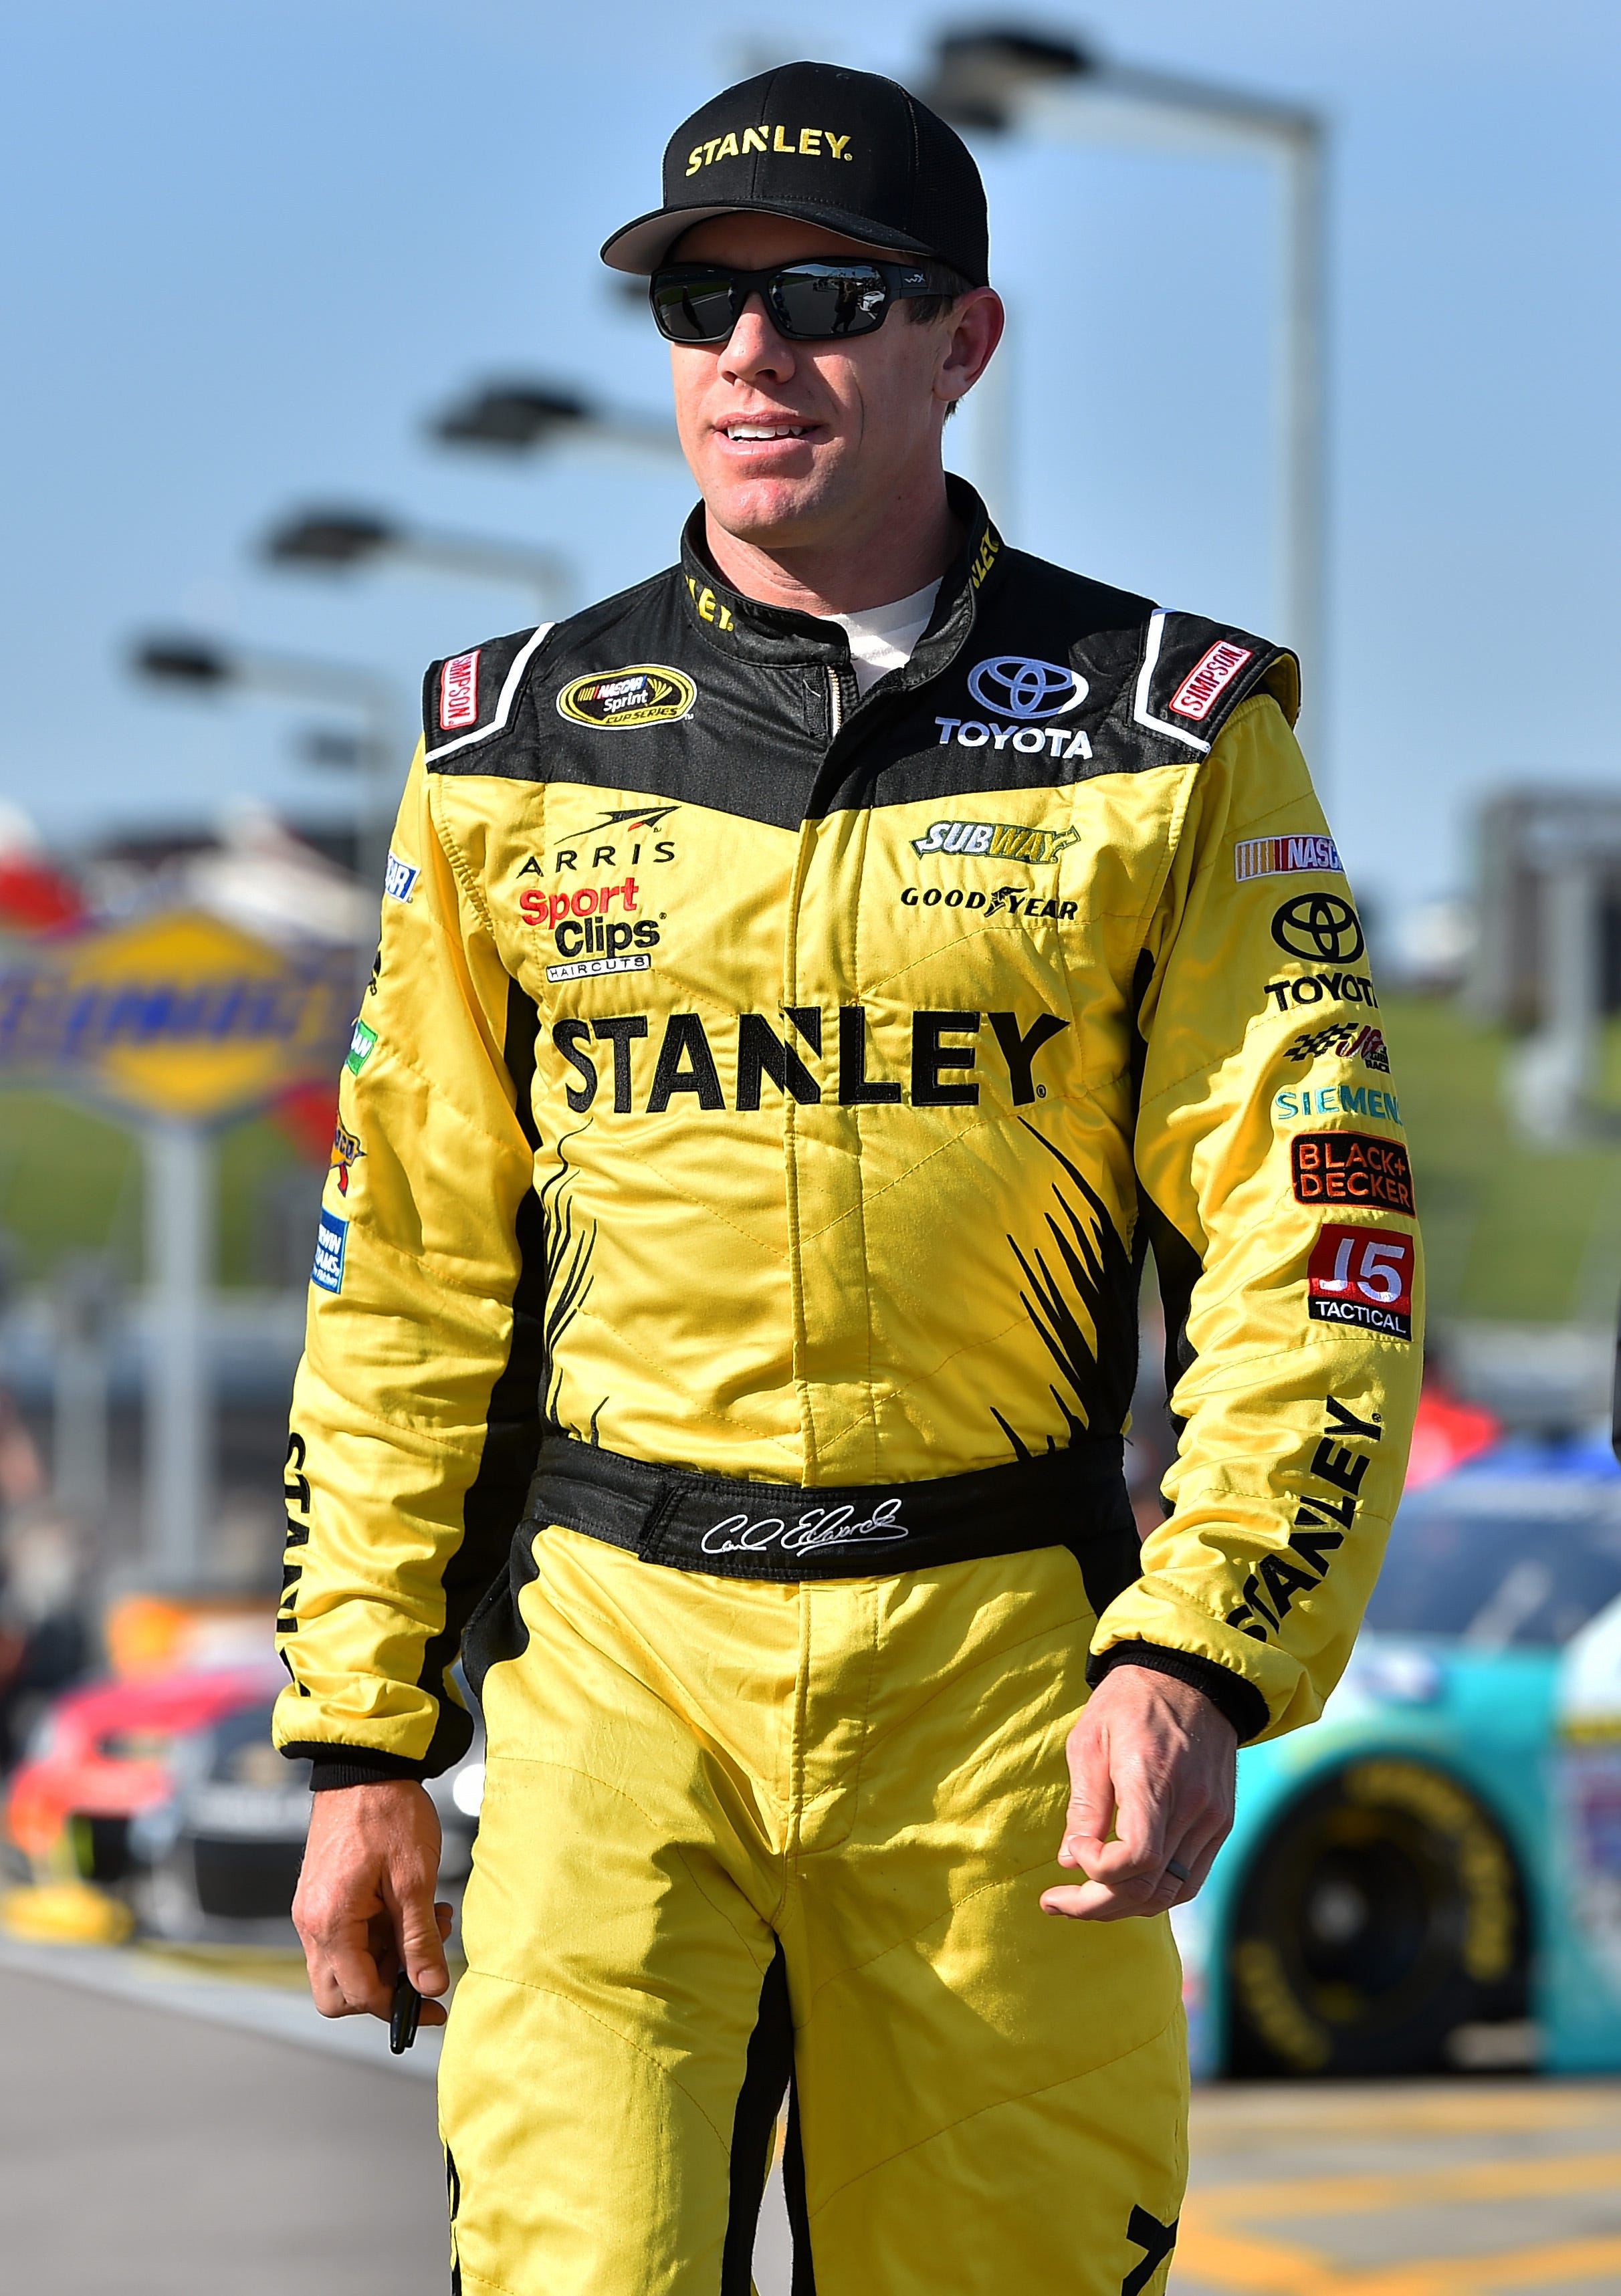 NASCAR's Carl Edwards flying high to better life